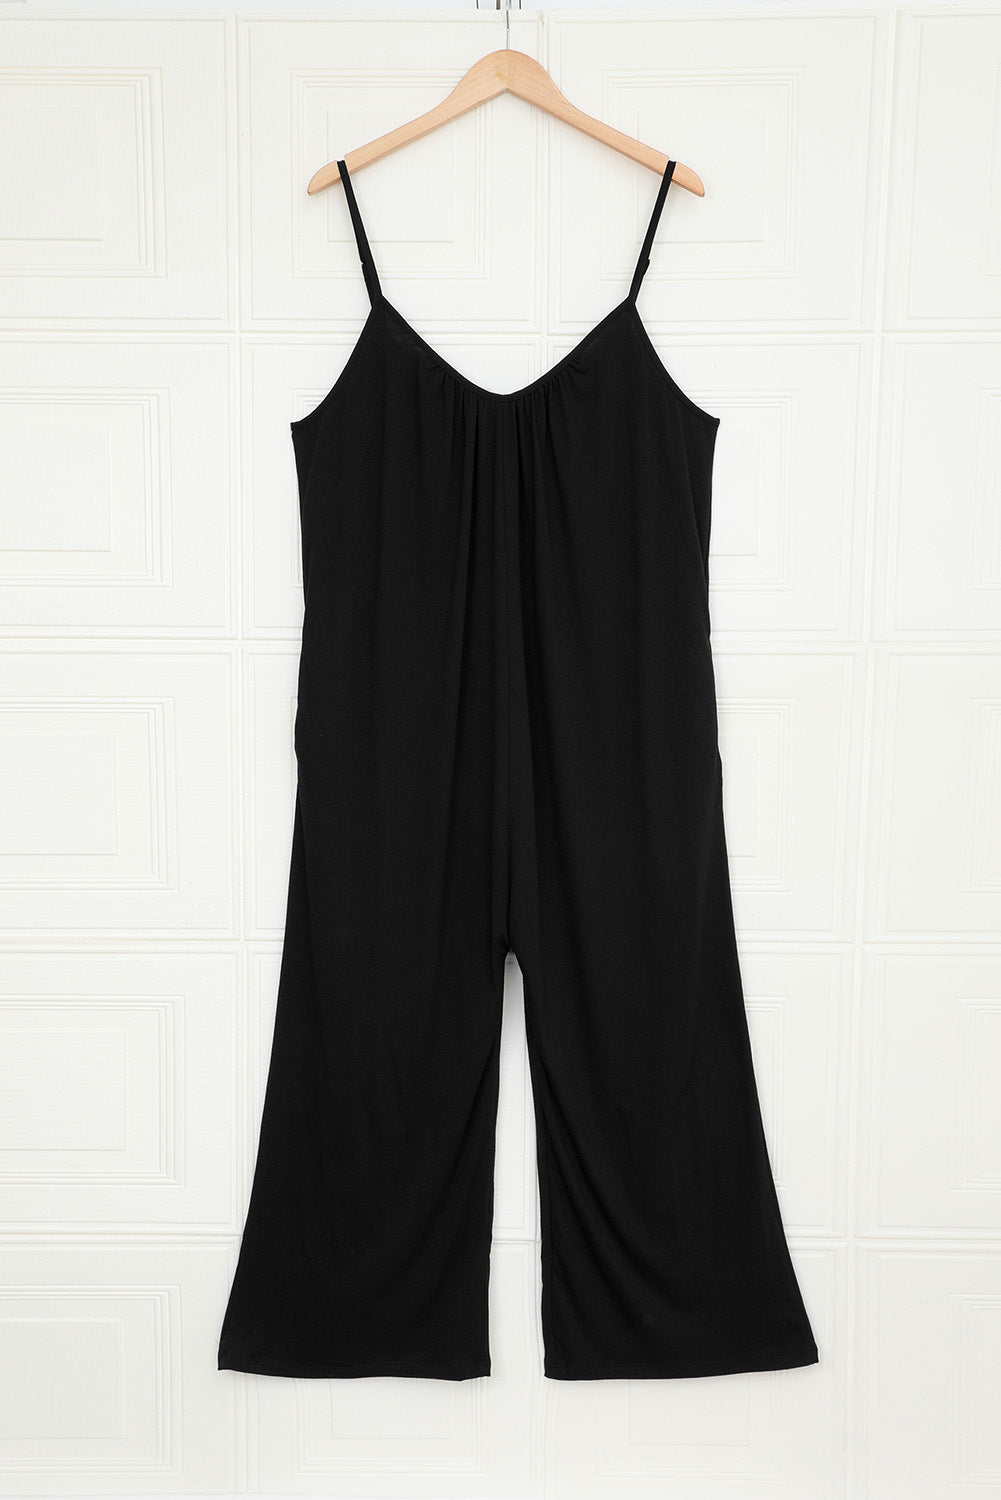 Casual Black Spaghetti Straps Wide Leg Pocketed Jumpsuits